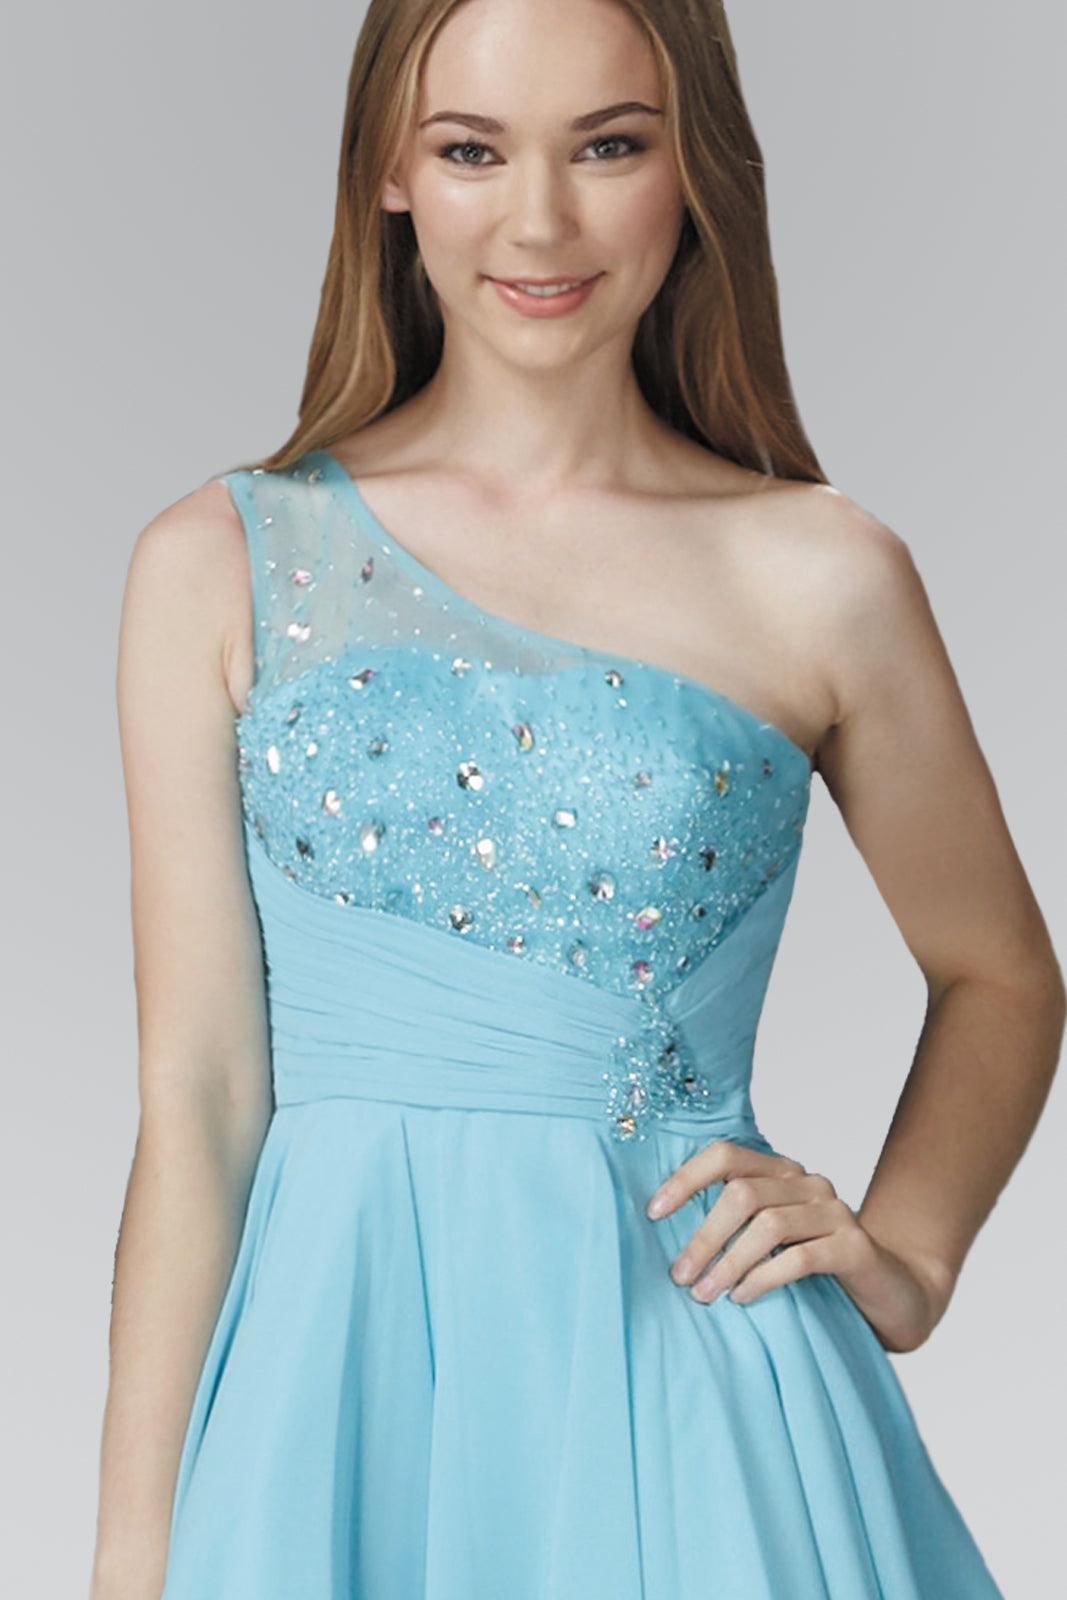 Homecoming Short One Shoulder Chiffon Cocktail Dress - The Dress Outlet